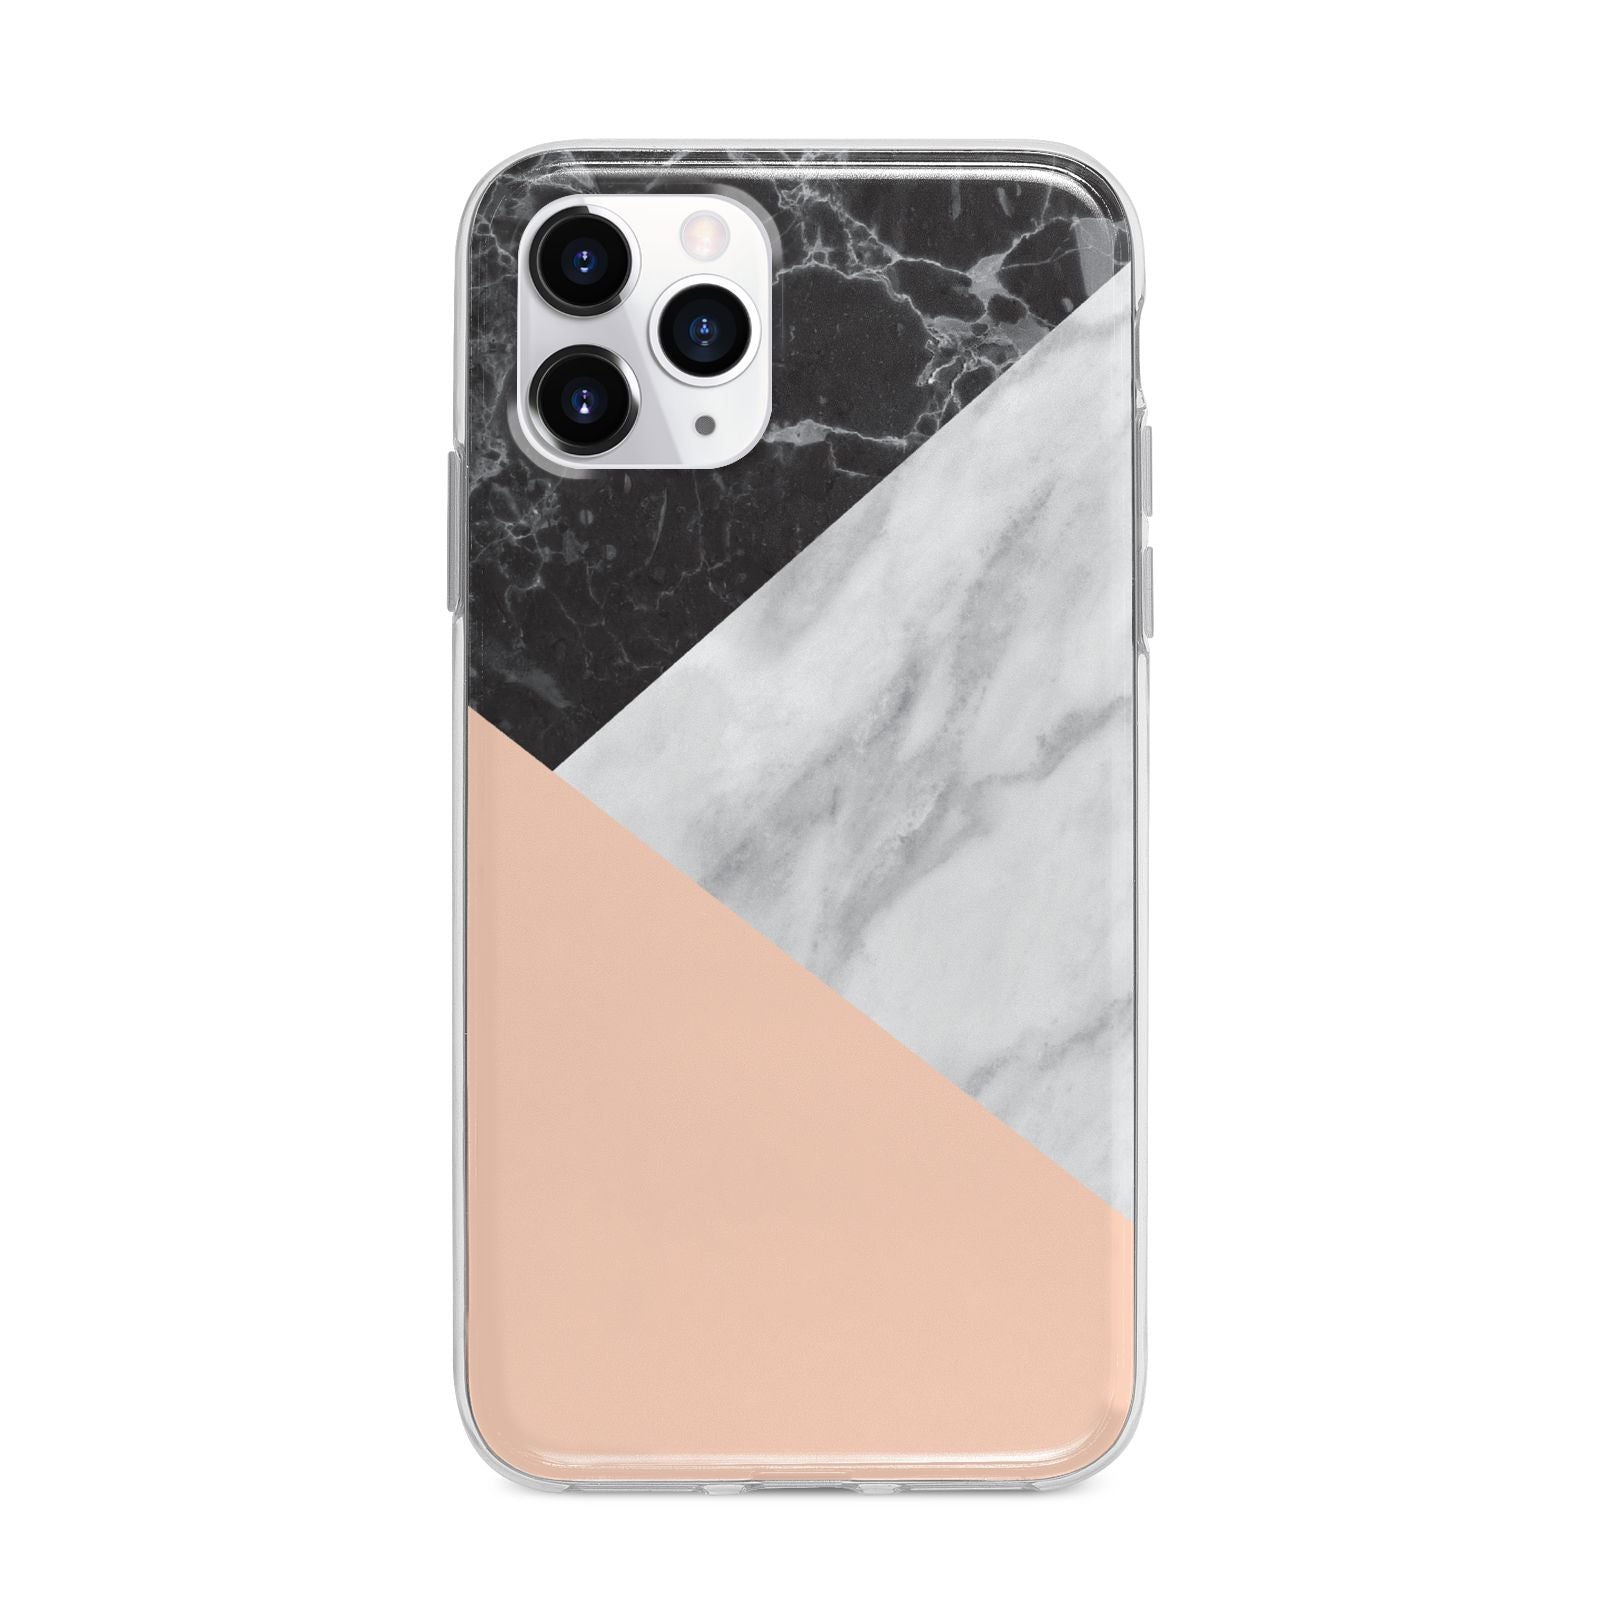 Marble Black White Grey Peach Apple iPhone 11 Pro in Silver with Bumper Case